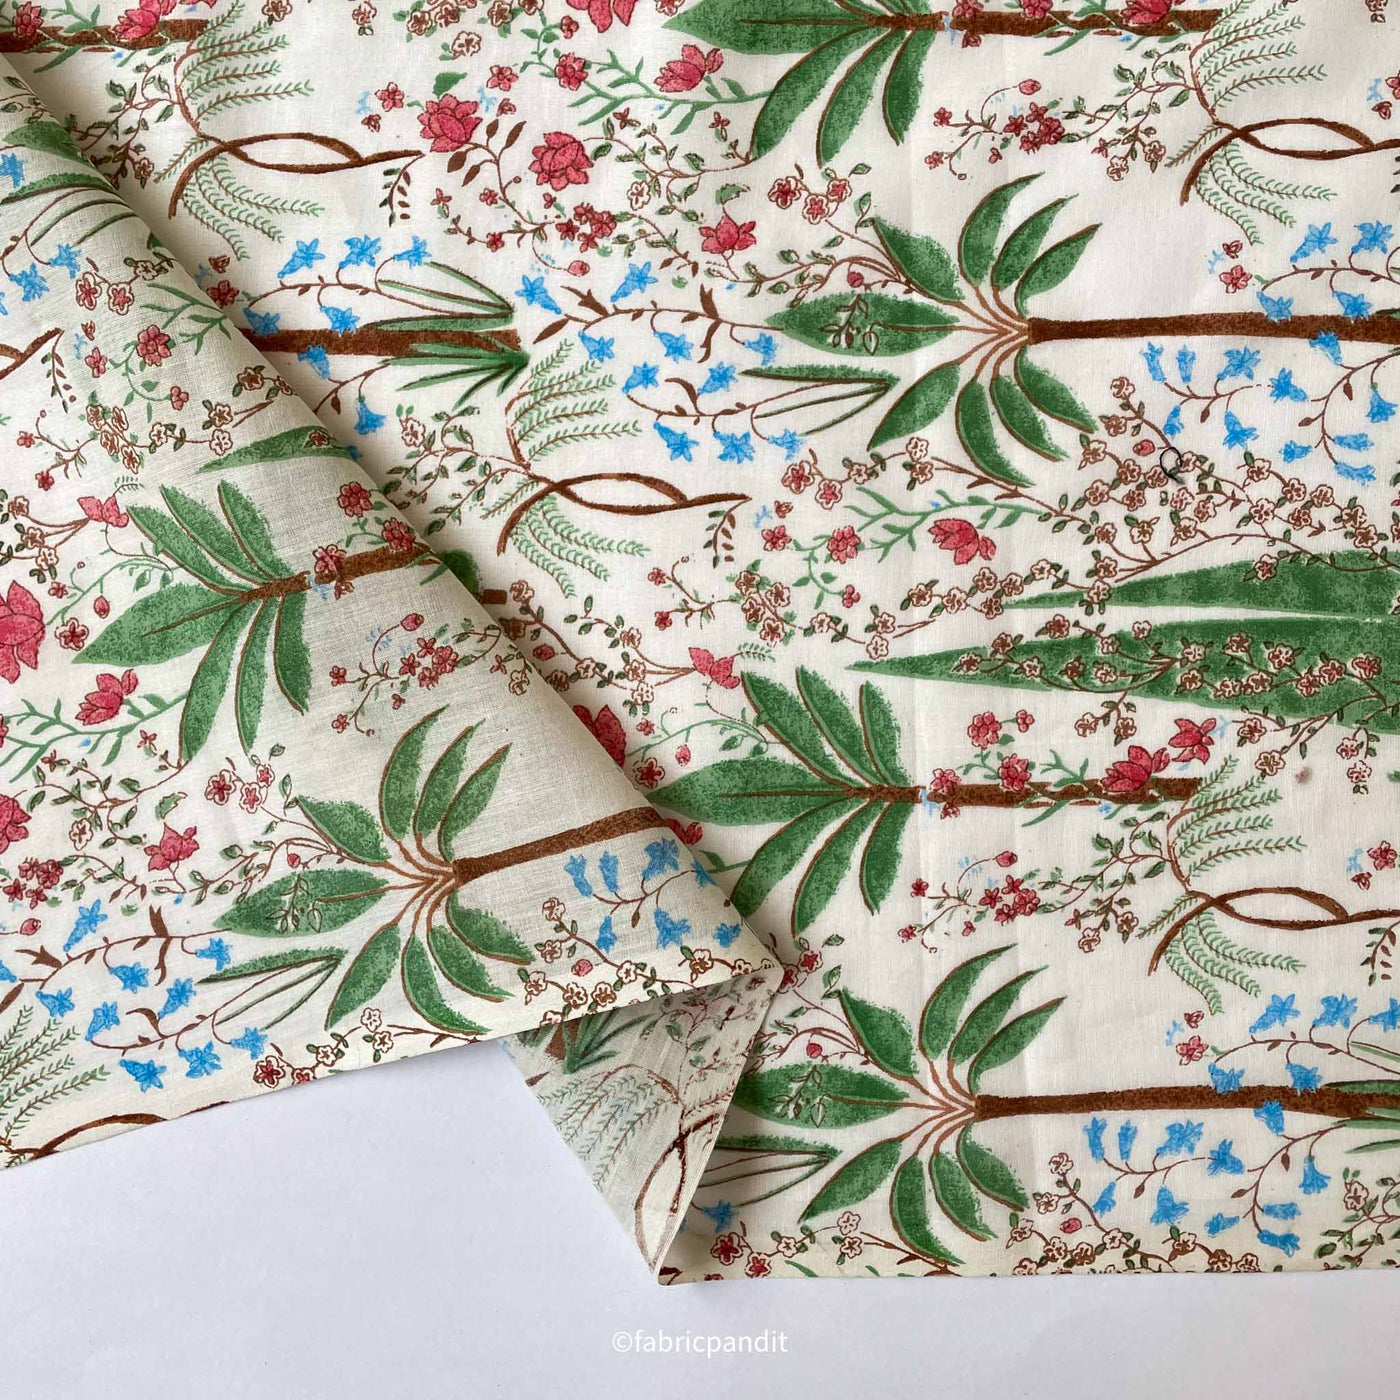 Fabric Pandit Fabric Fresh Green and Pink The Calm of Oasis Hand Block Printed Pure Mul Cotton Fabric